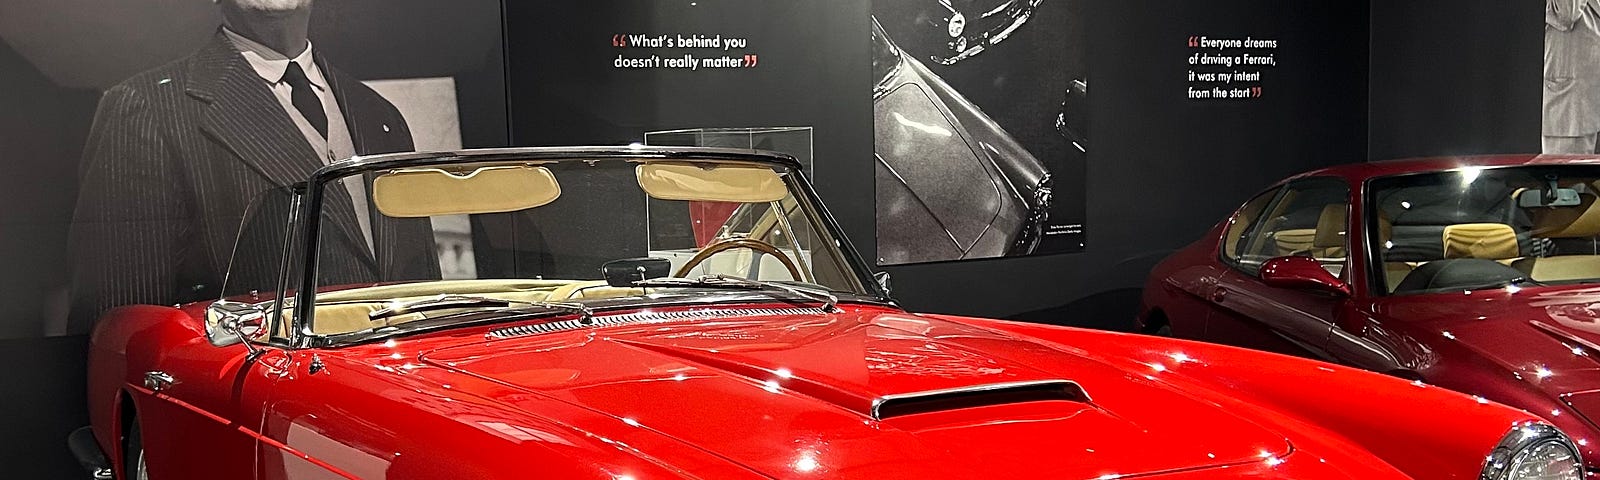 A red Ferrari GT250. Behind it on the wall a photograph of Enzo Ferrari with his quote, “What’s behind you doesn’t really matter”. The car is on display at Haynes Motor Museum, Sparkford, Yeovil, Somerset, England. Image: Roland Millward.